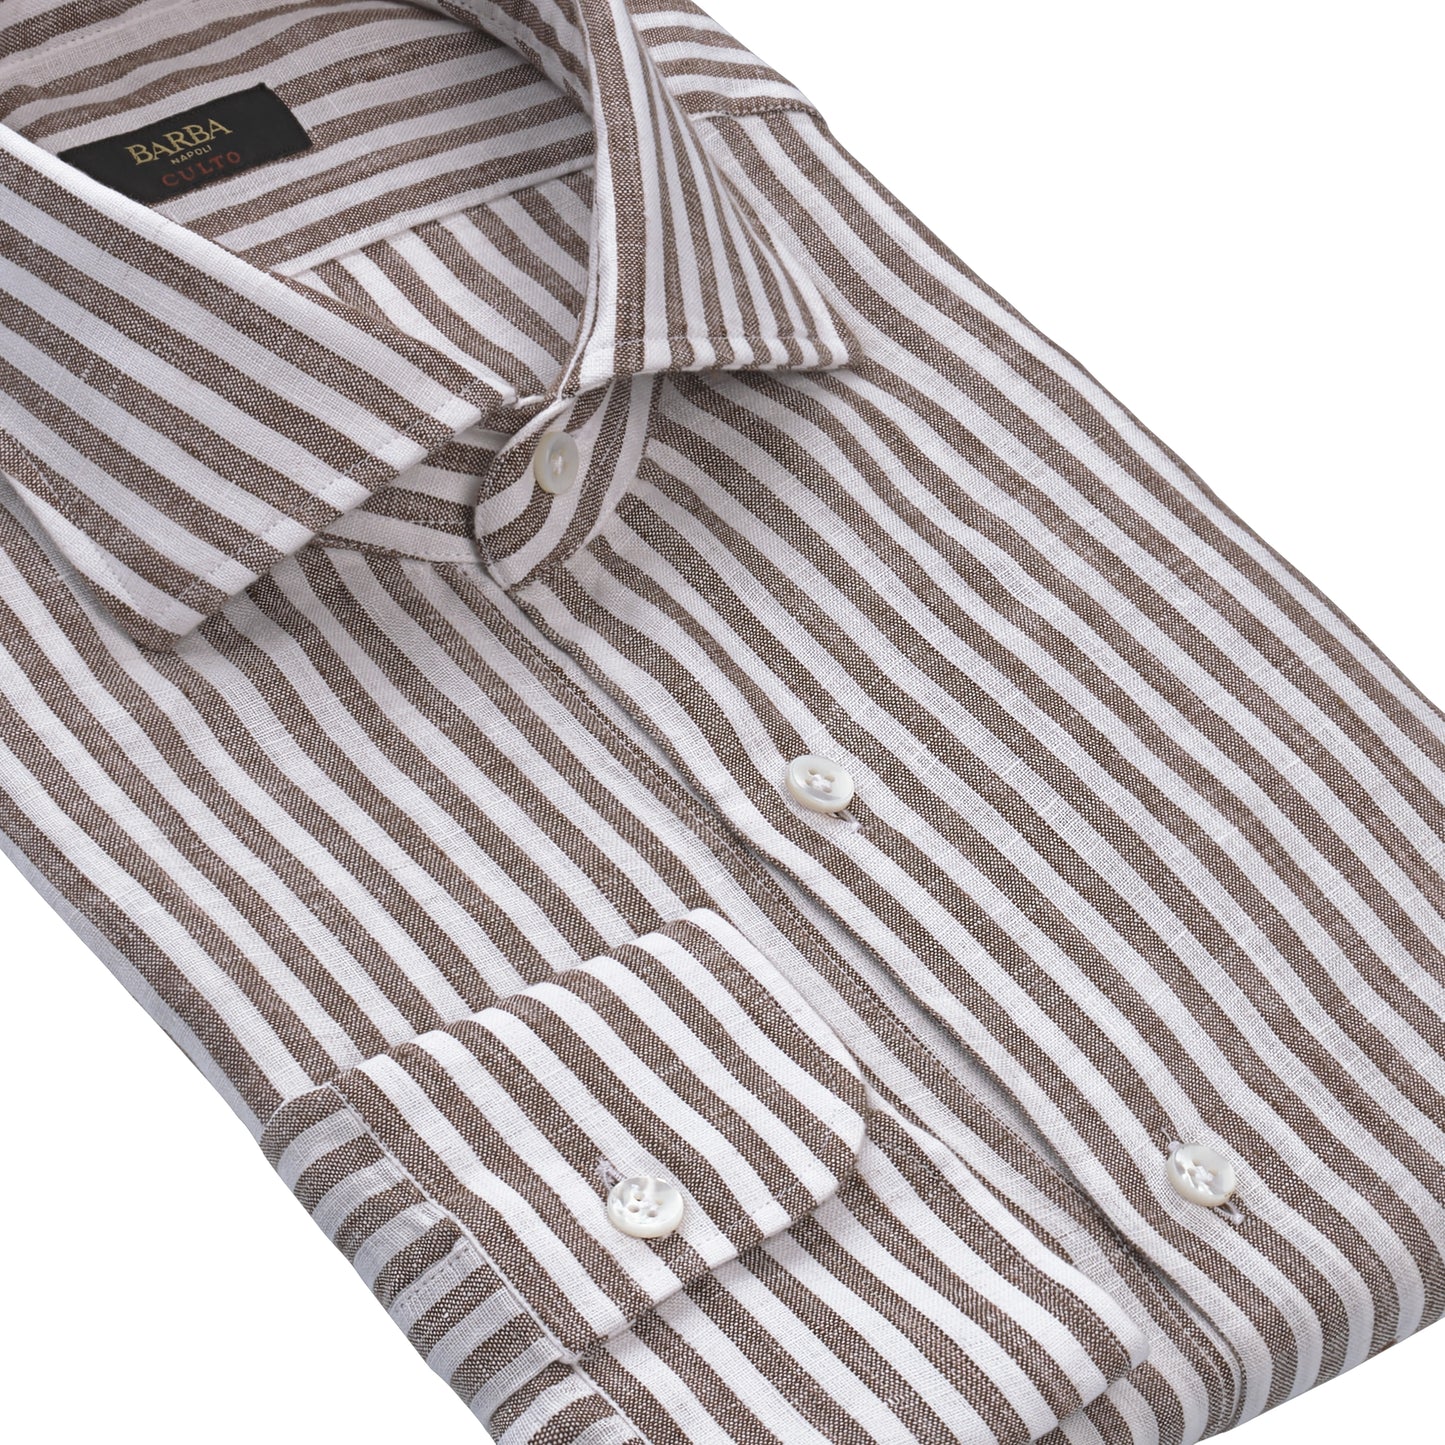 Striped Linen Shirt in Brown and White